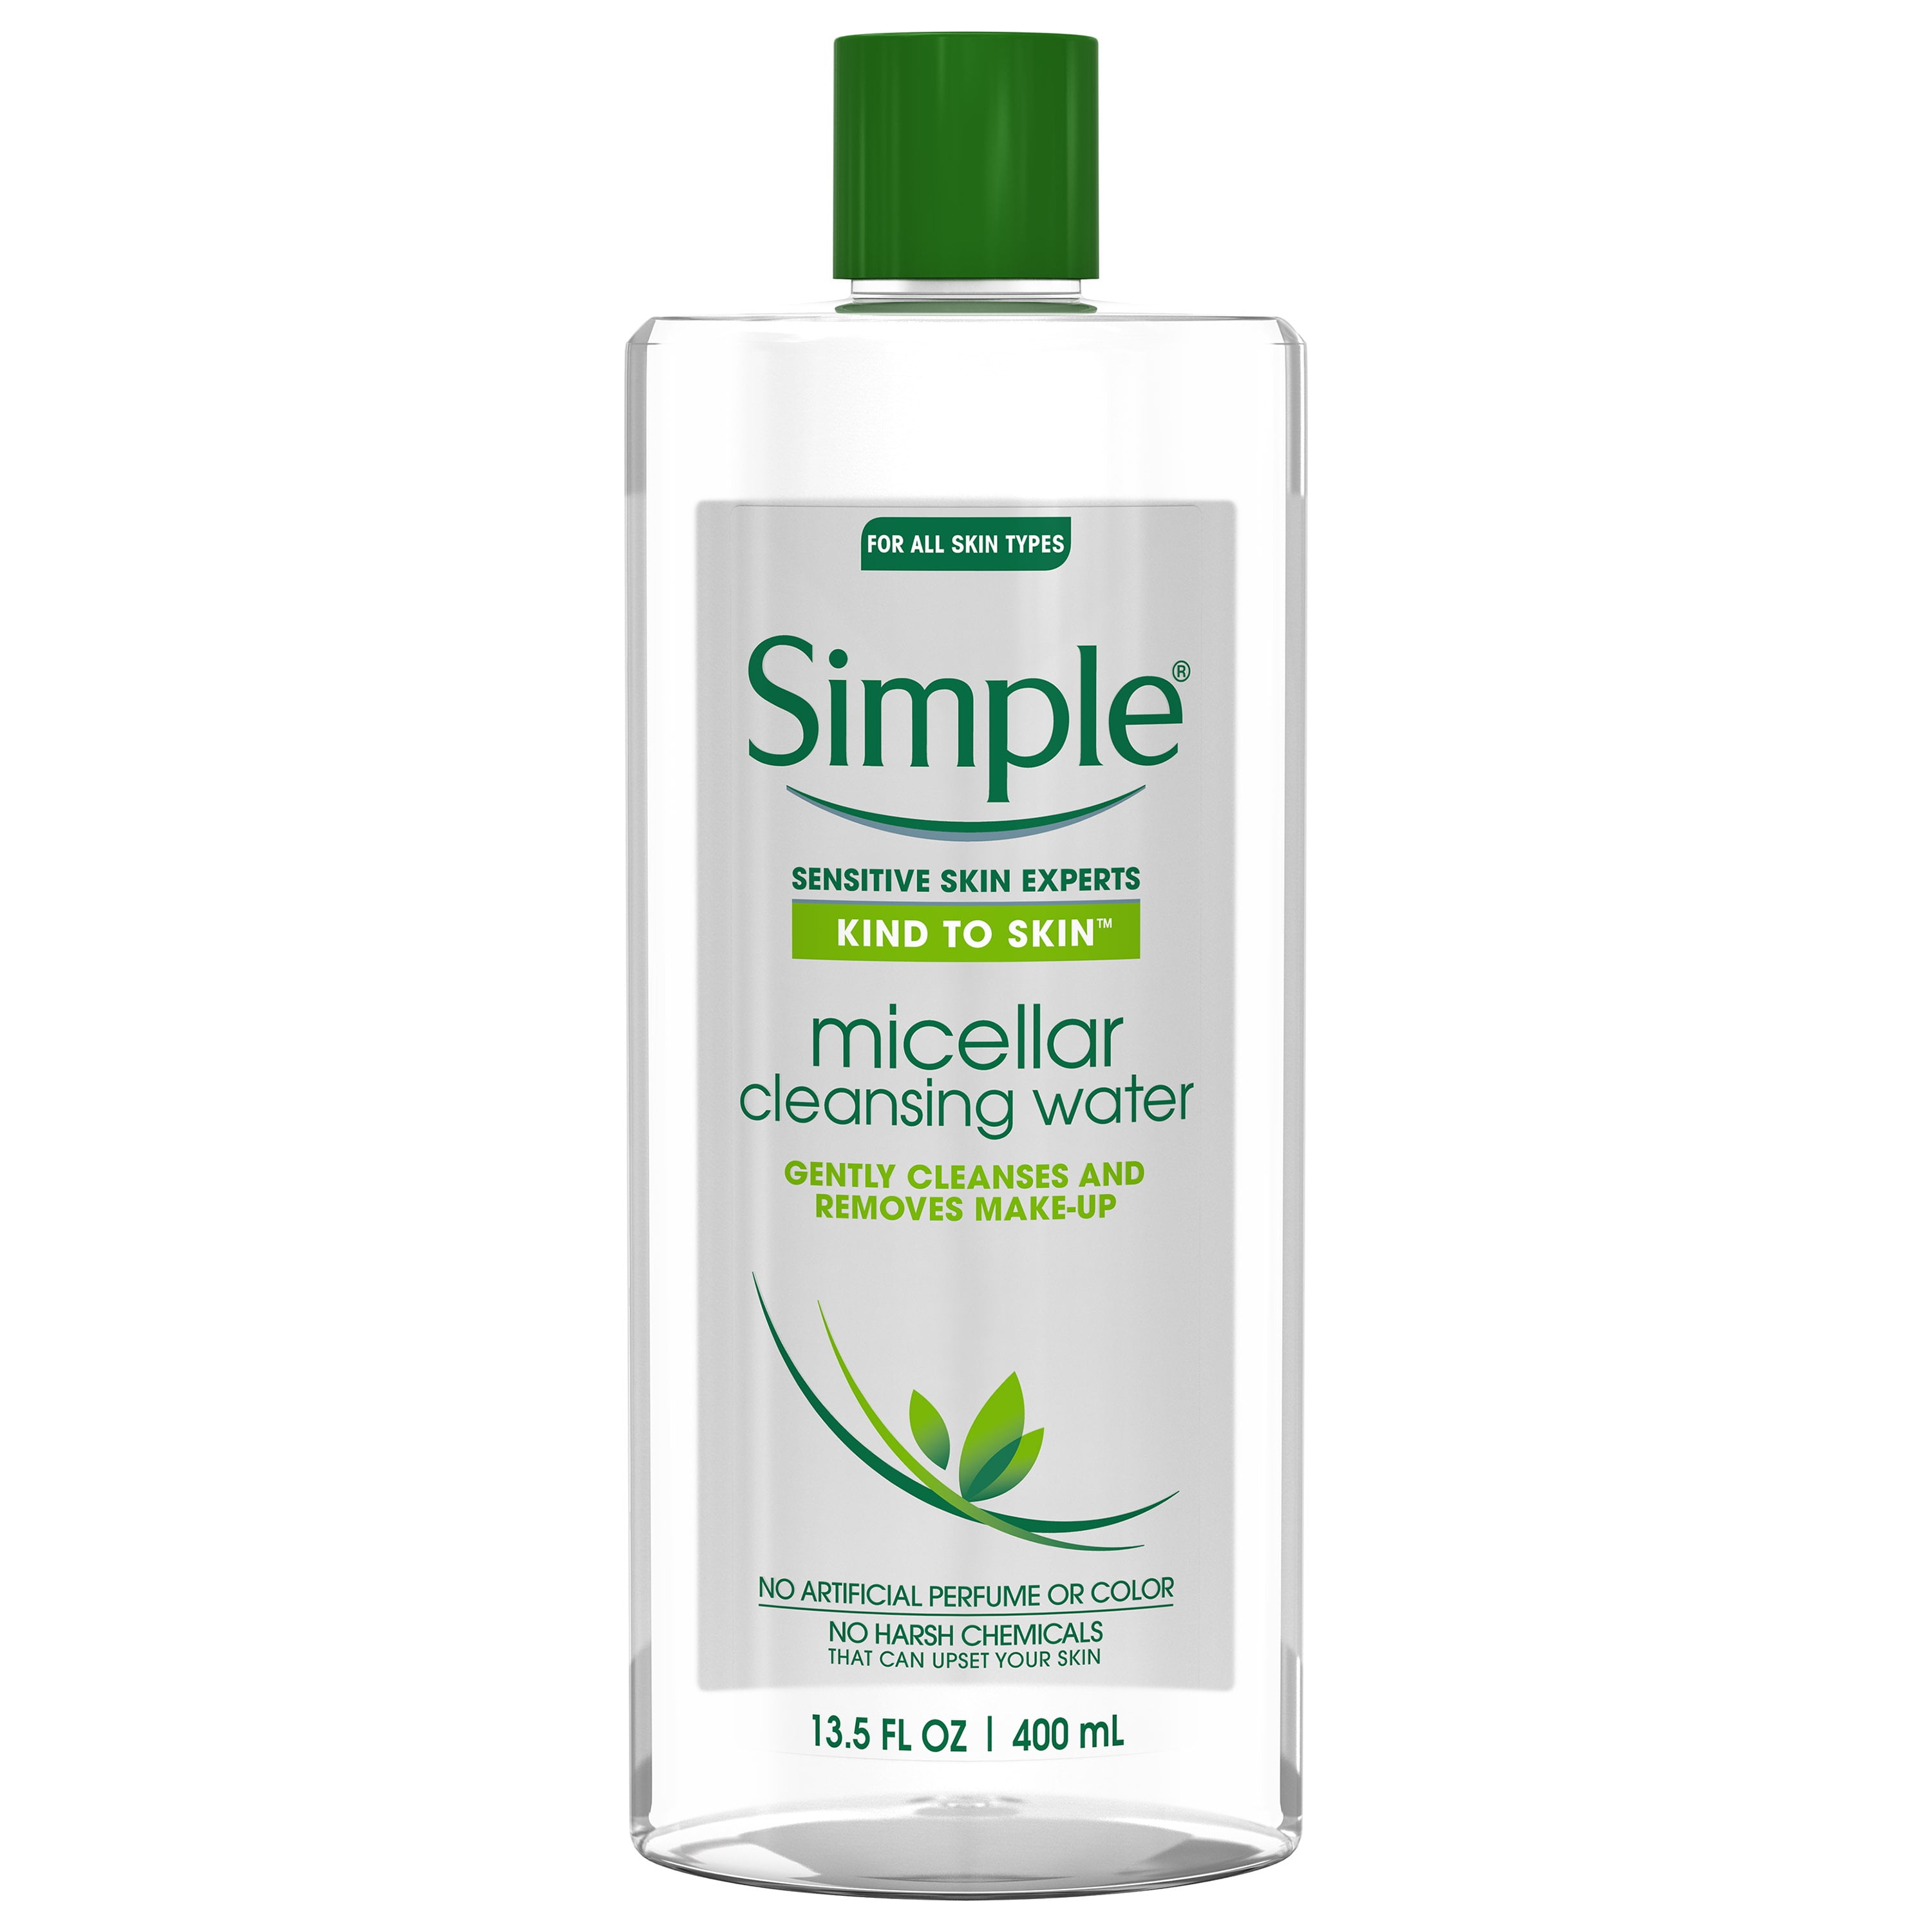 Simply cleaning. Micellar Cleansing. The simple мицеллярная вода. Sensitive Micellar Water. Esteline Micellar Cleansing.